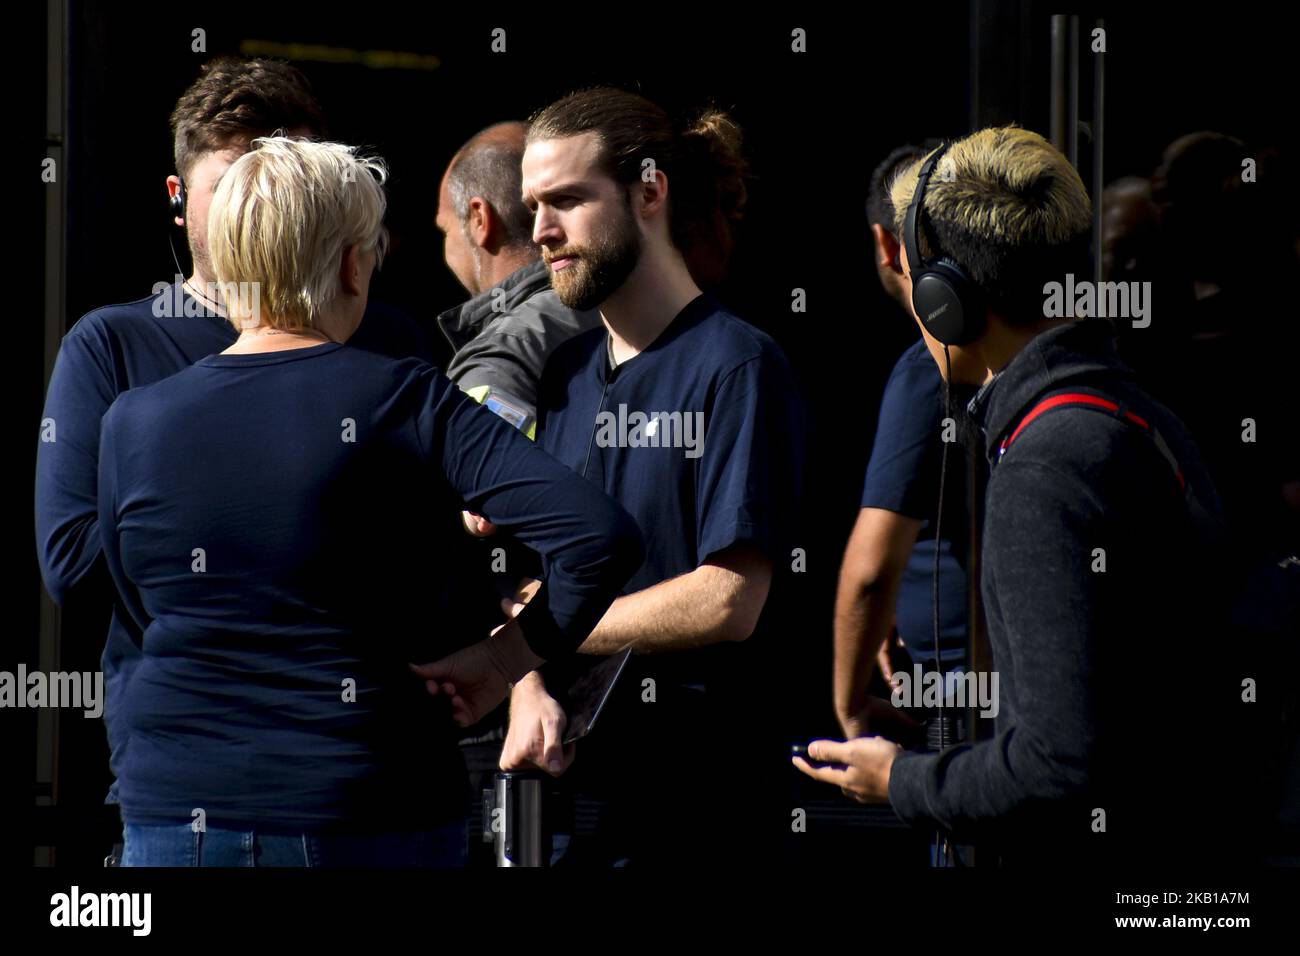 People queue outside the Apple Store at Regent Street as Apple launch the new iPhone XS, London on September 21, 2018. Apple have today launched their new mobile phones: the iPhone XS, iPhone XS Max and the Apple Watch Series 4 across 30 countries. (Photo by Alberto Pezzali/NurPhoto) Stock Photo